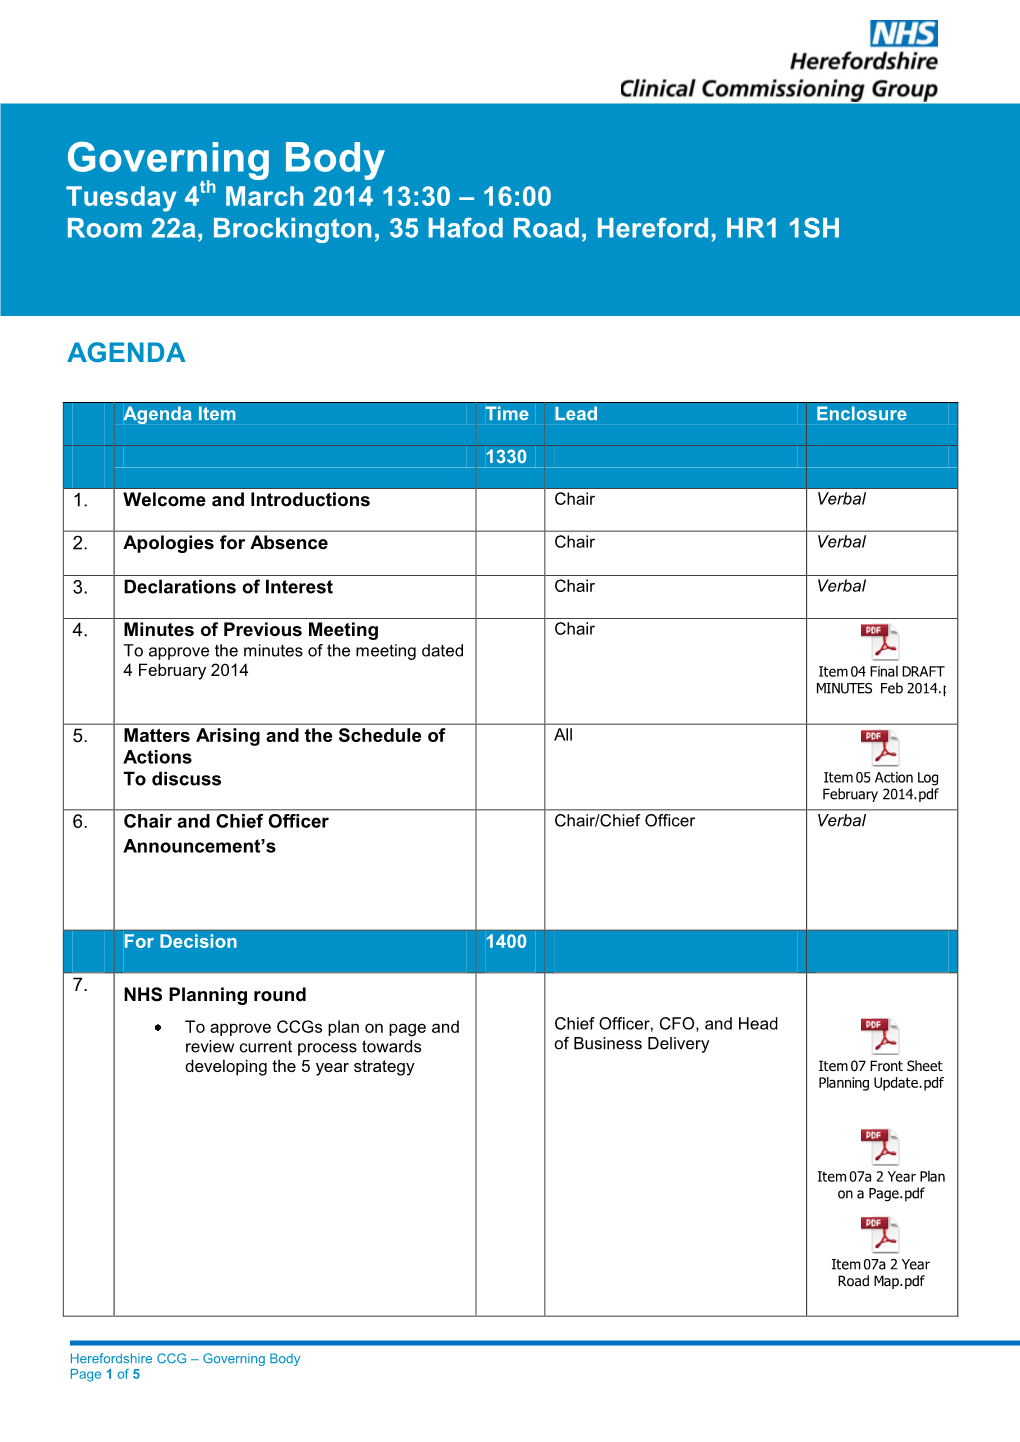 Governing Body Th Tuesday 4 March 2014 13:30 – 16:00 Room 22A, Brockington, 35 Hafod Road, Hereford, HR1 1SH